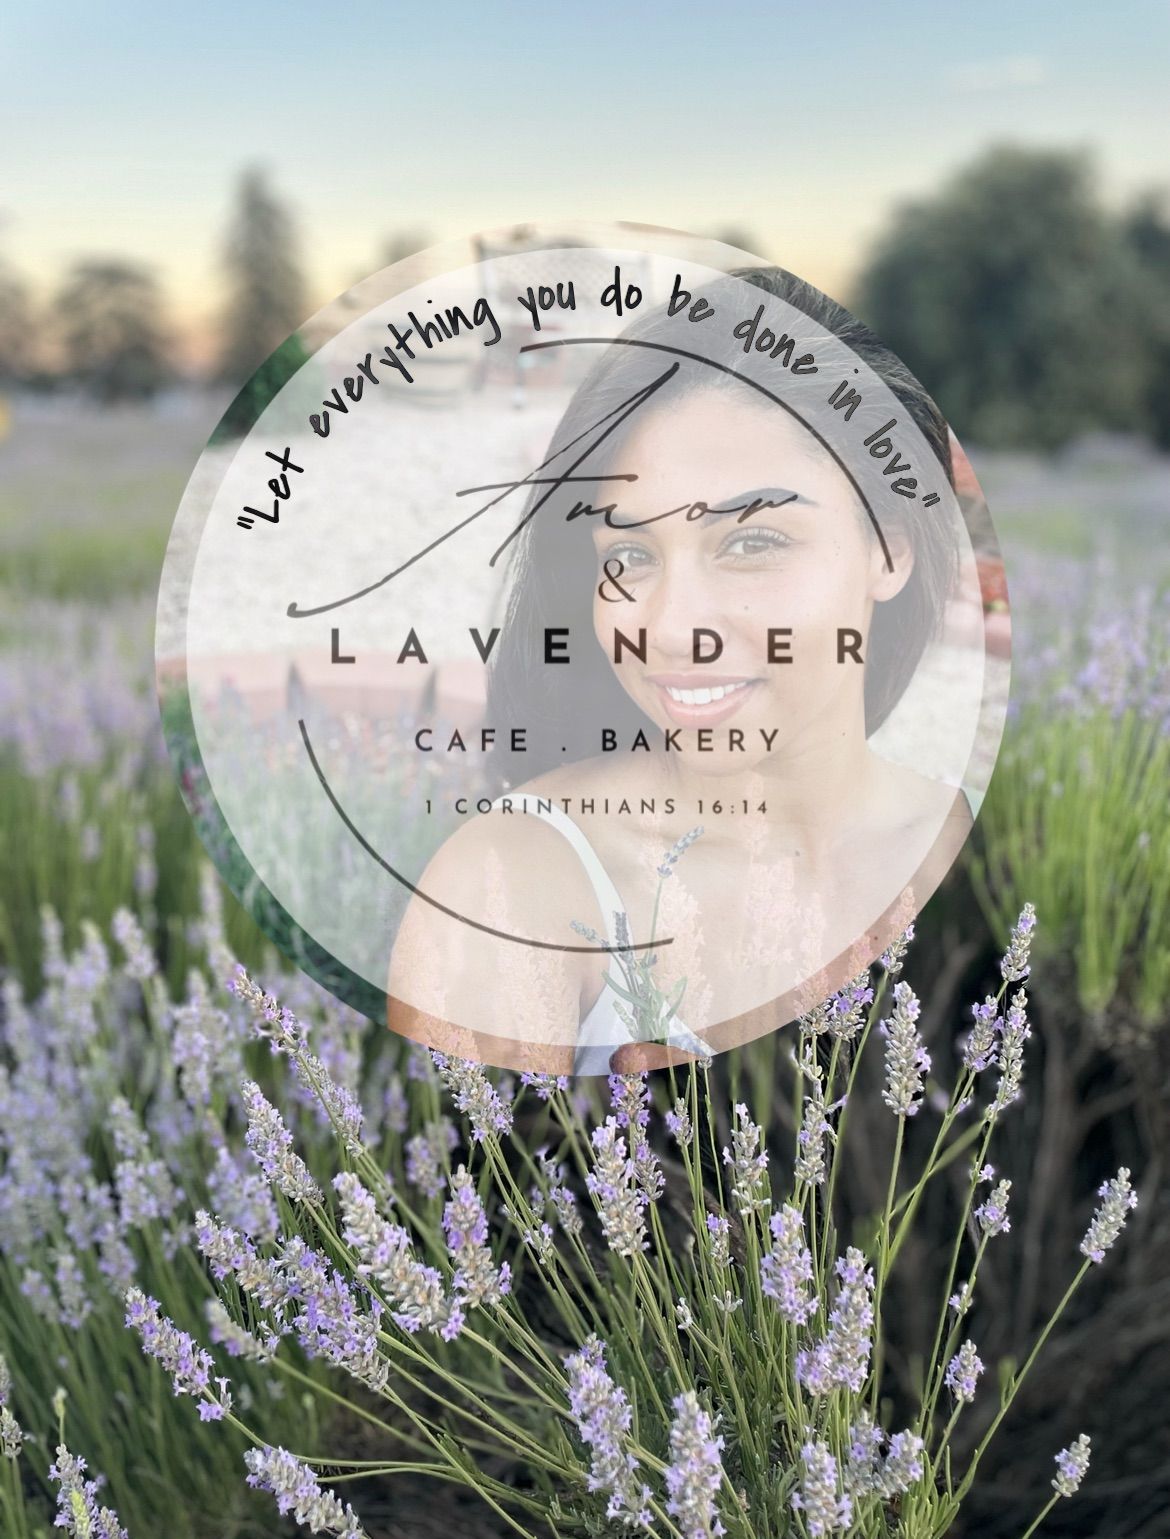 Come Celebrate the Launch of Amor & Lavender